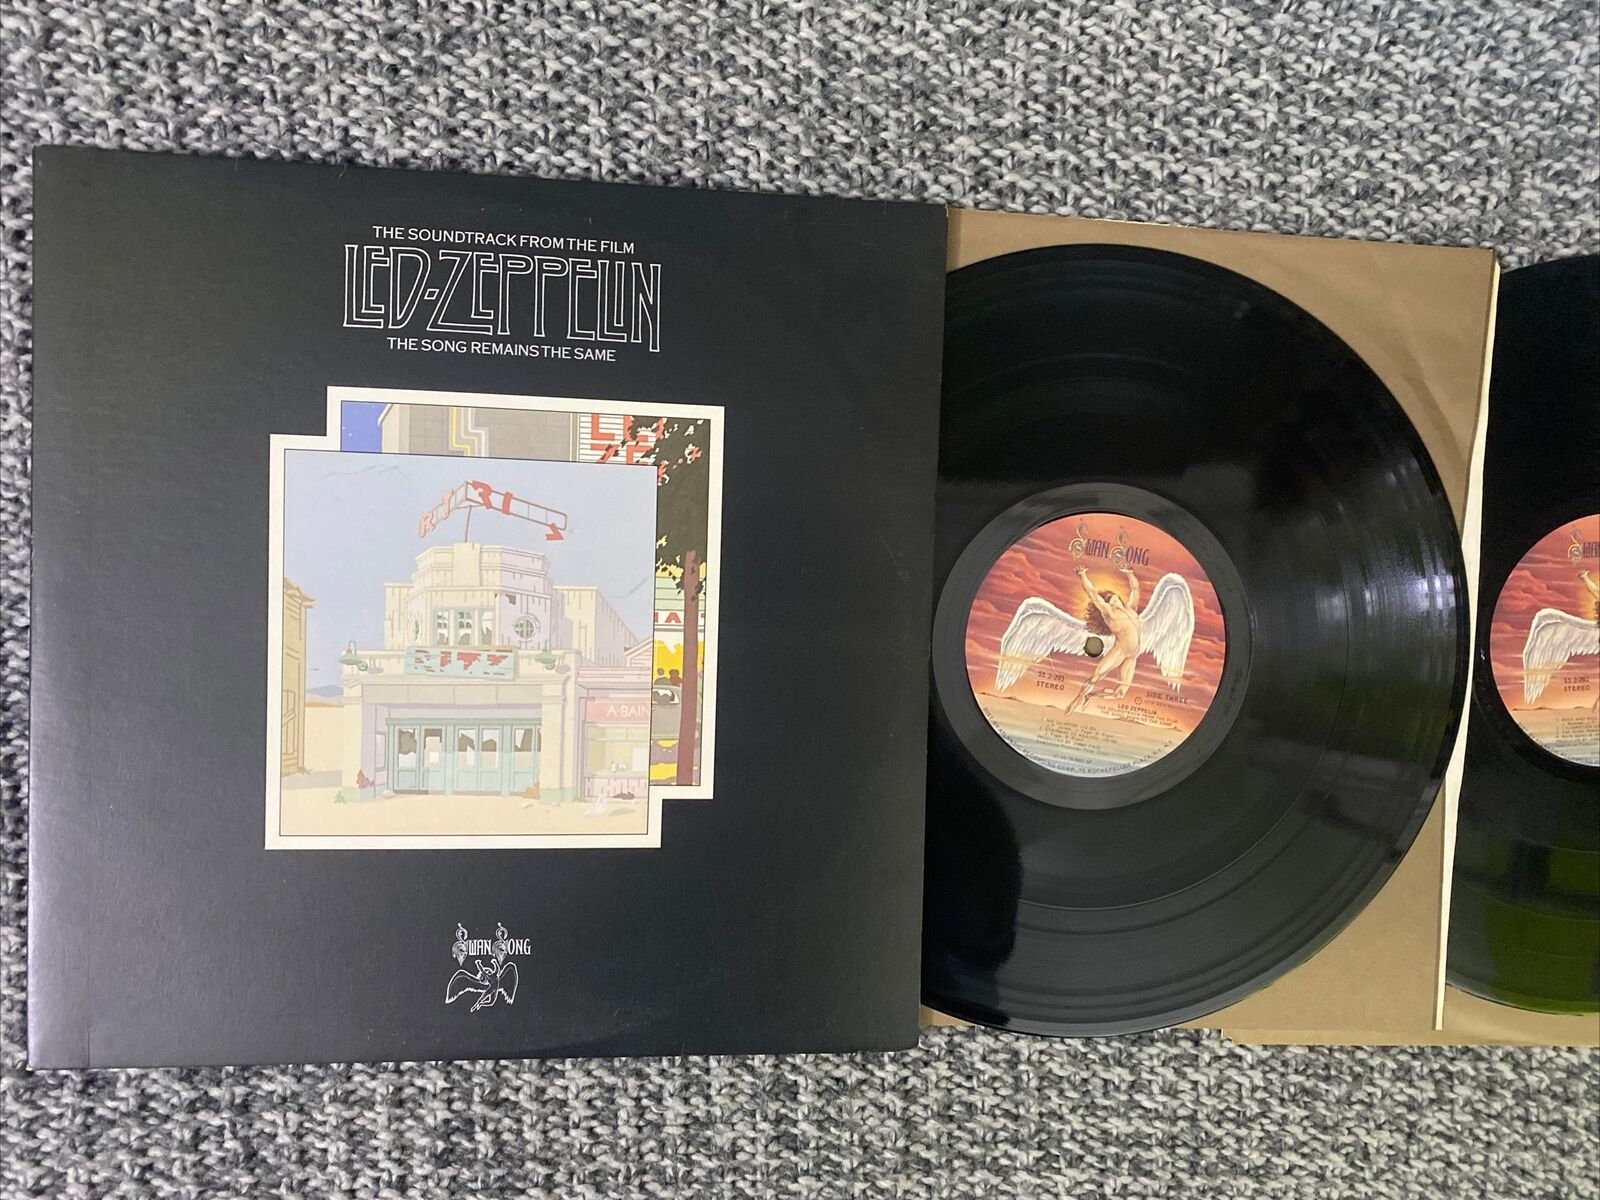 Led Zeppelin Lp The Song Remains The Same 1976 N. N  SS-2-201  2 X Lp